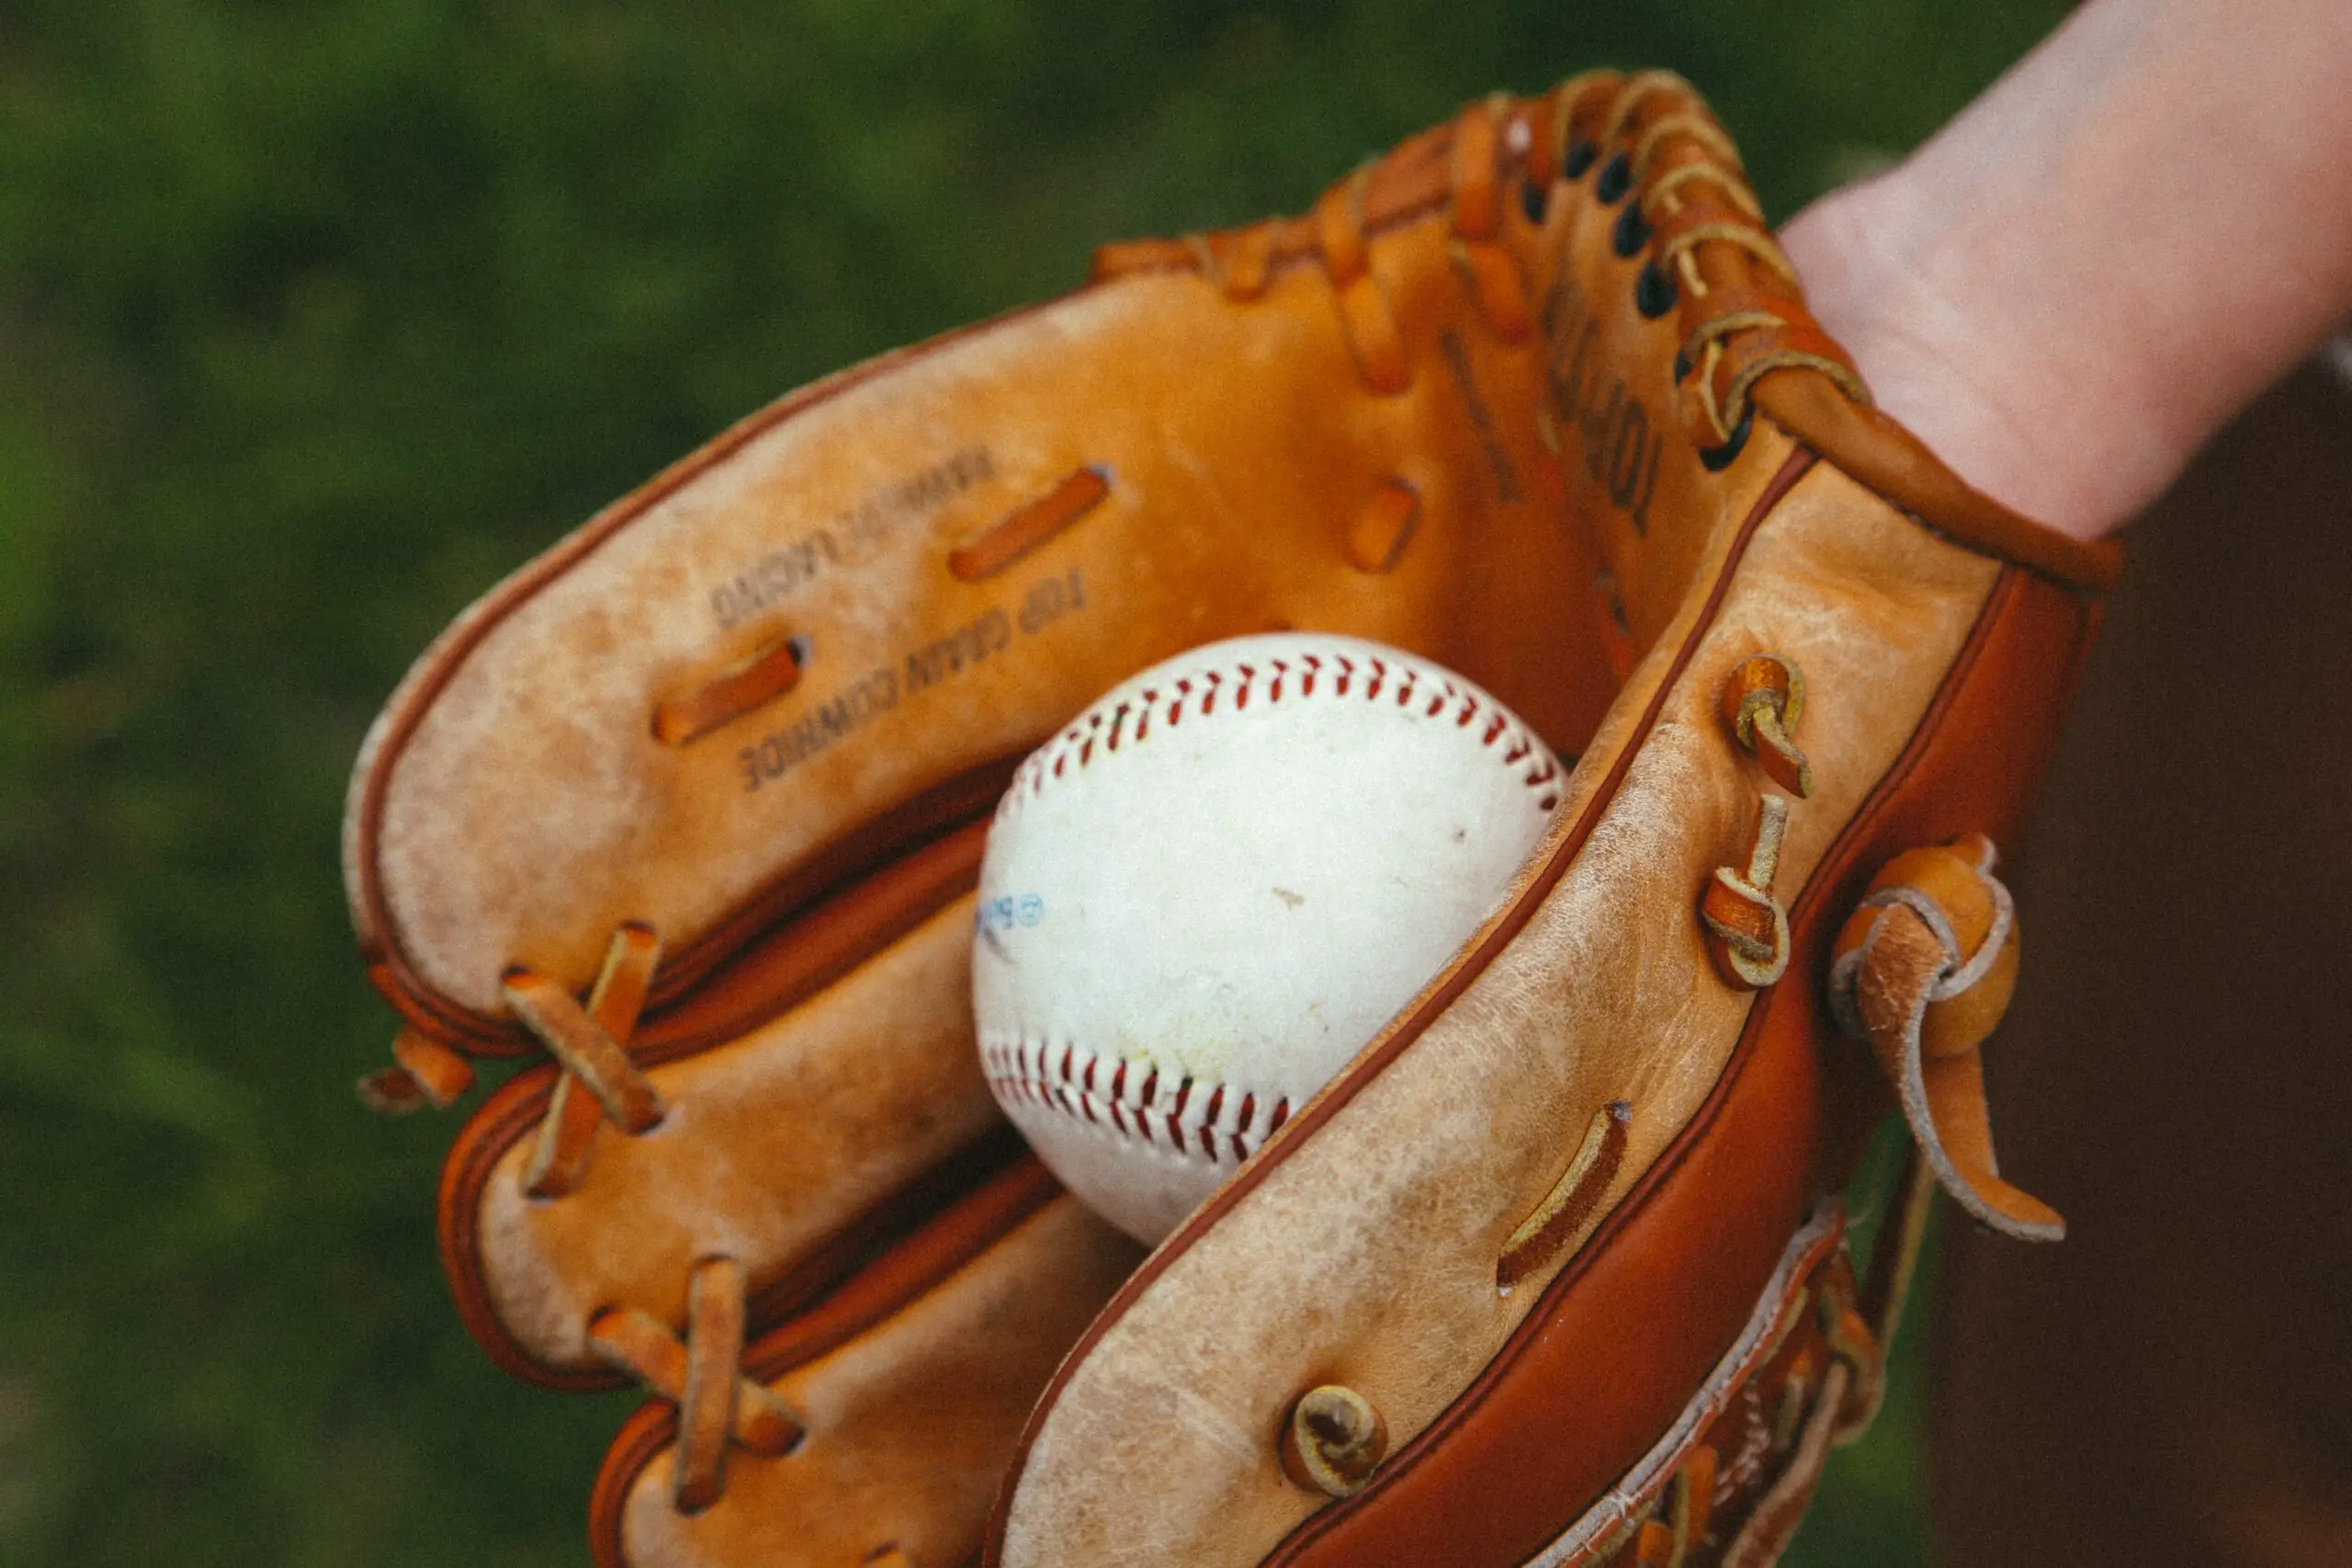 What Are The Types Of Equipment Used In Baseball?